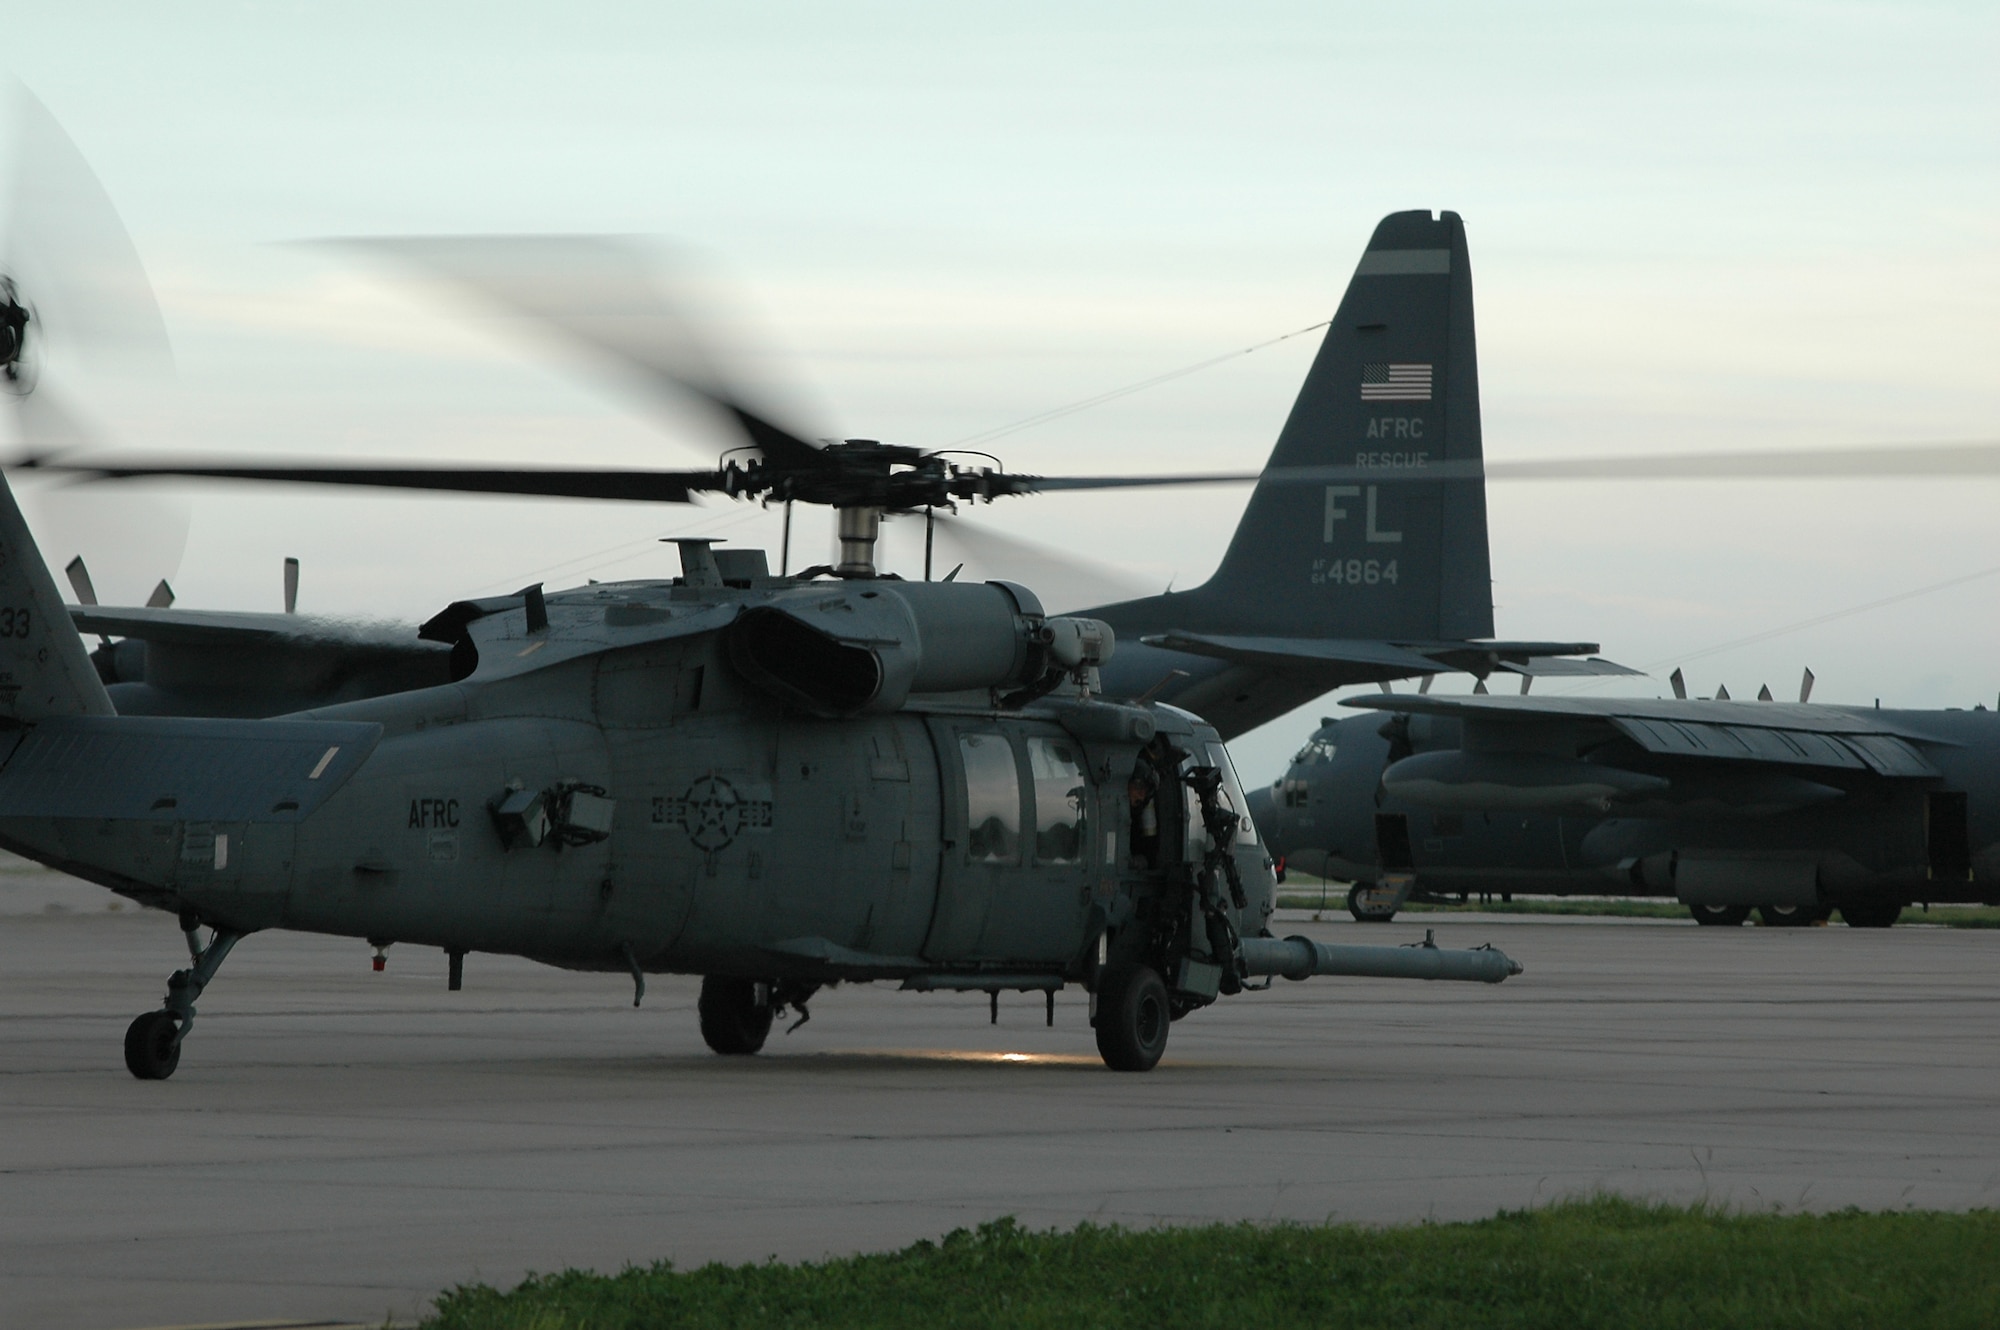 Air Force Reserve rescue helicopter crews from 920th Rescue Wing take time to refuel briefly at Patrick Air Force Base before heading back out to the Atlantic Ocean off the coast of Cape Canaveral, Fla. to continue their search efforts for a missing diver.